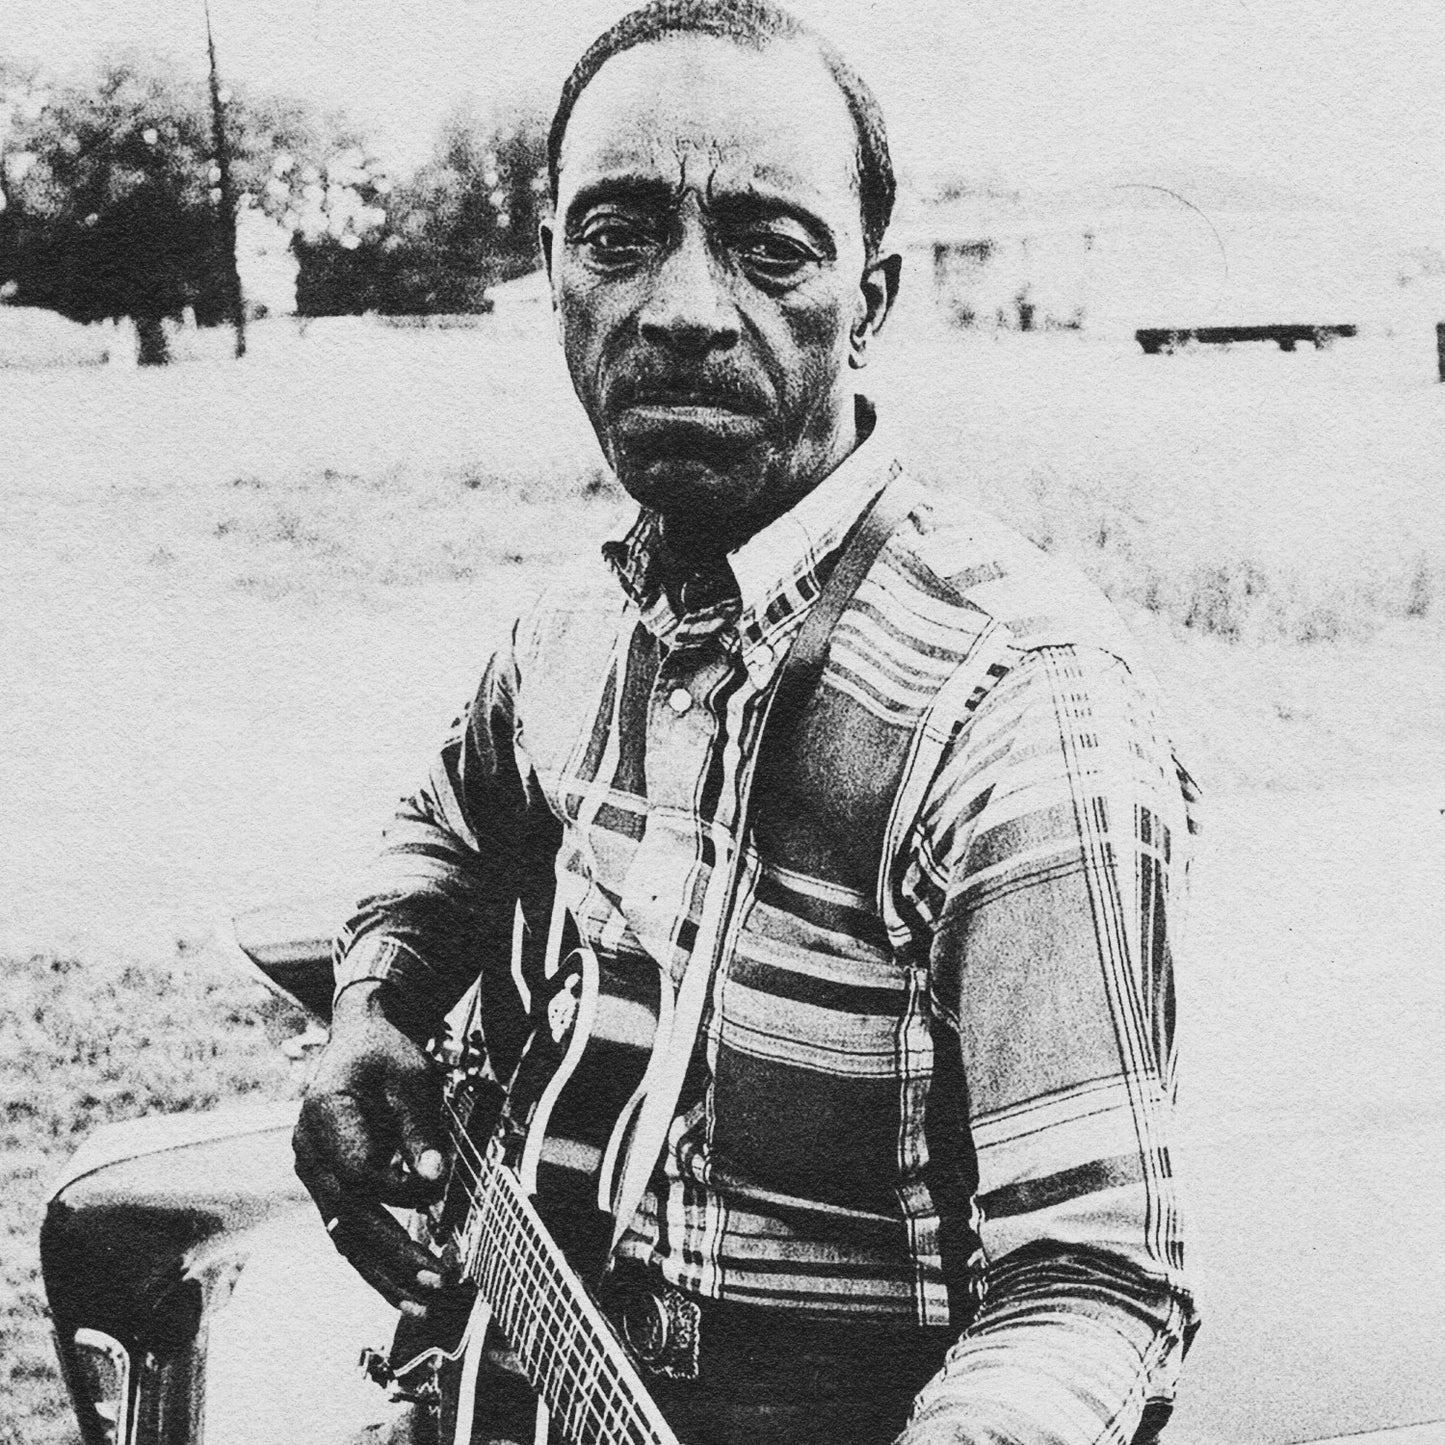 MISSISSIPPI FRED McDOWELL